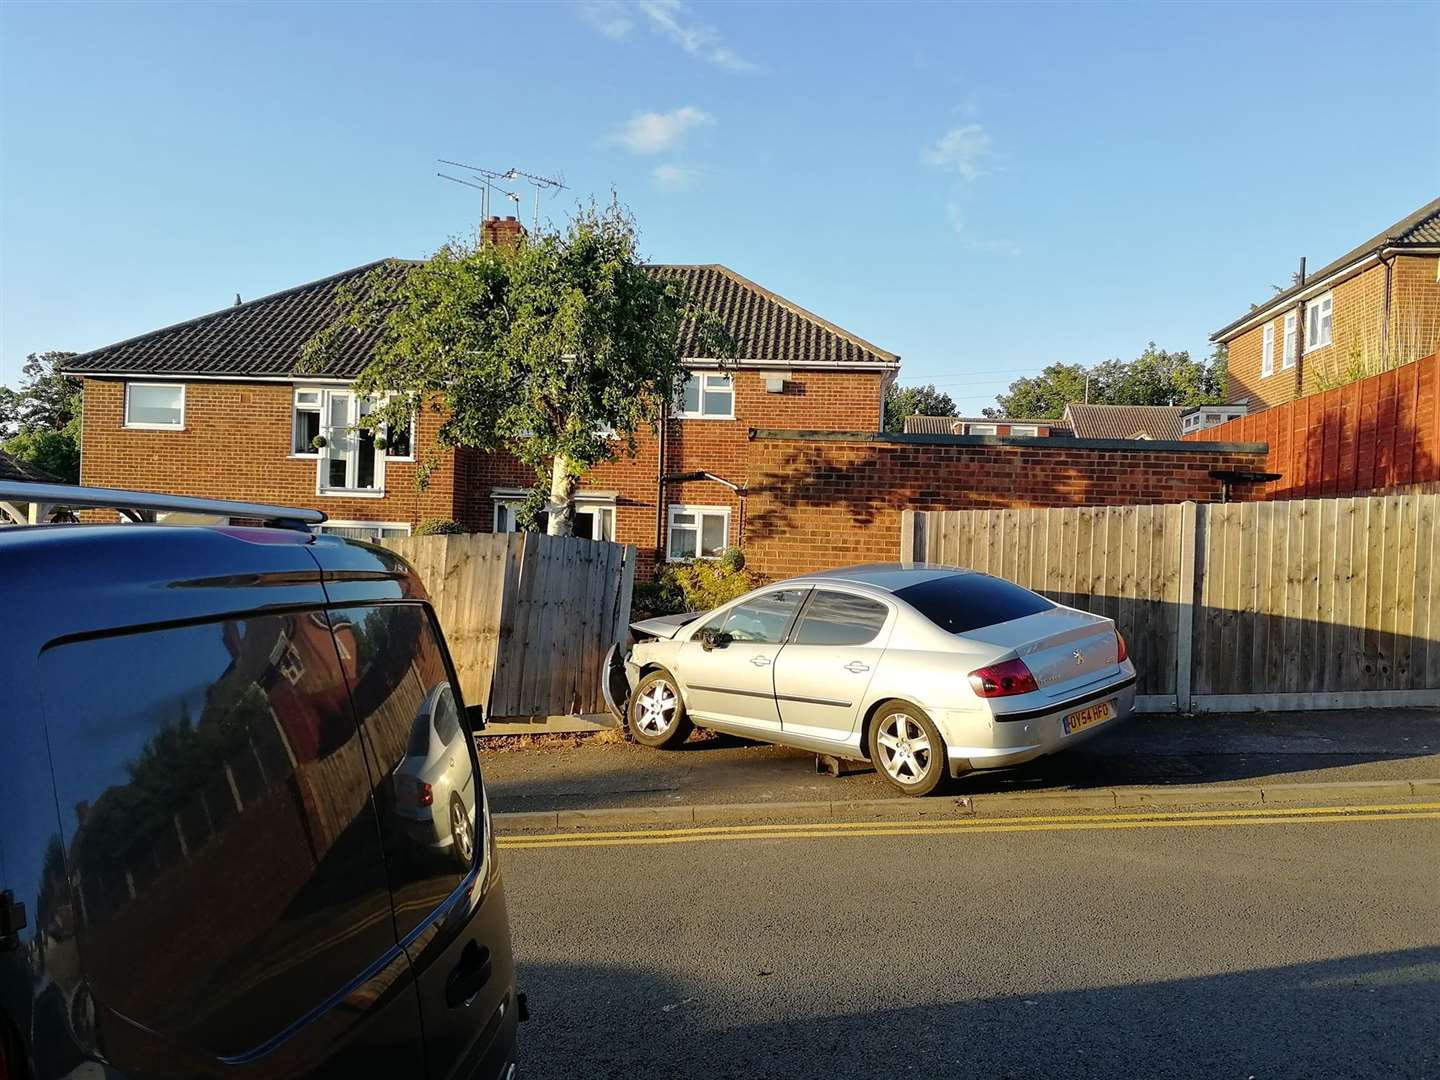 The grey car crashed into a fence in Manor Lane, Borstal. Picture: Sean Ryan